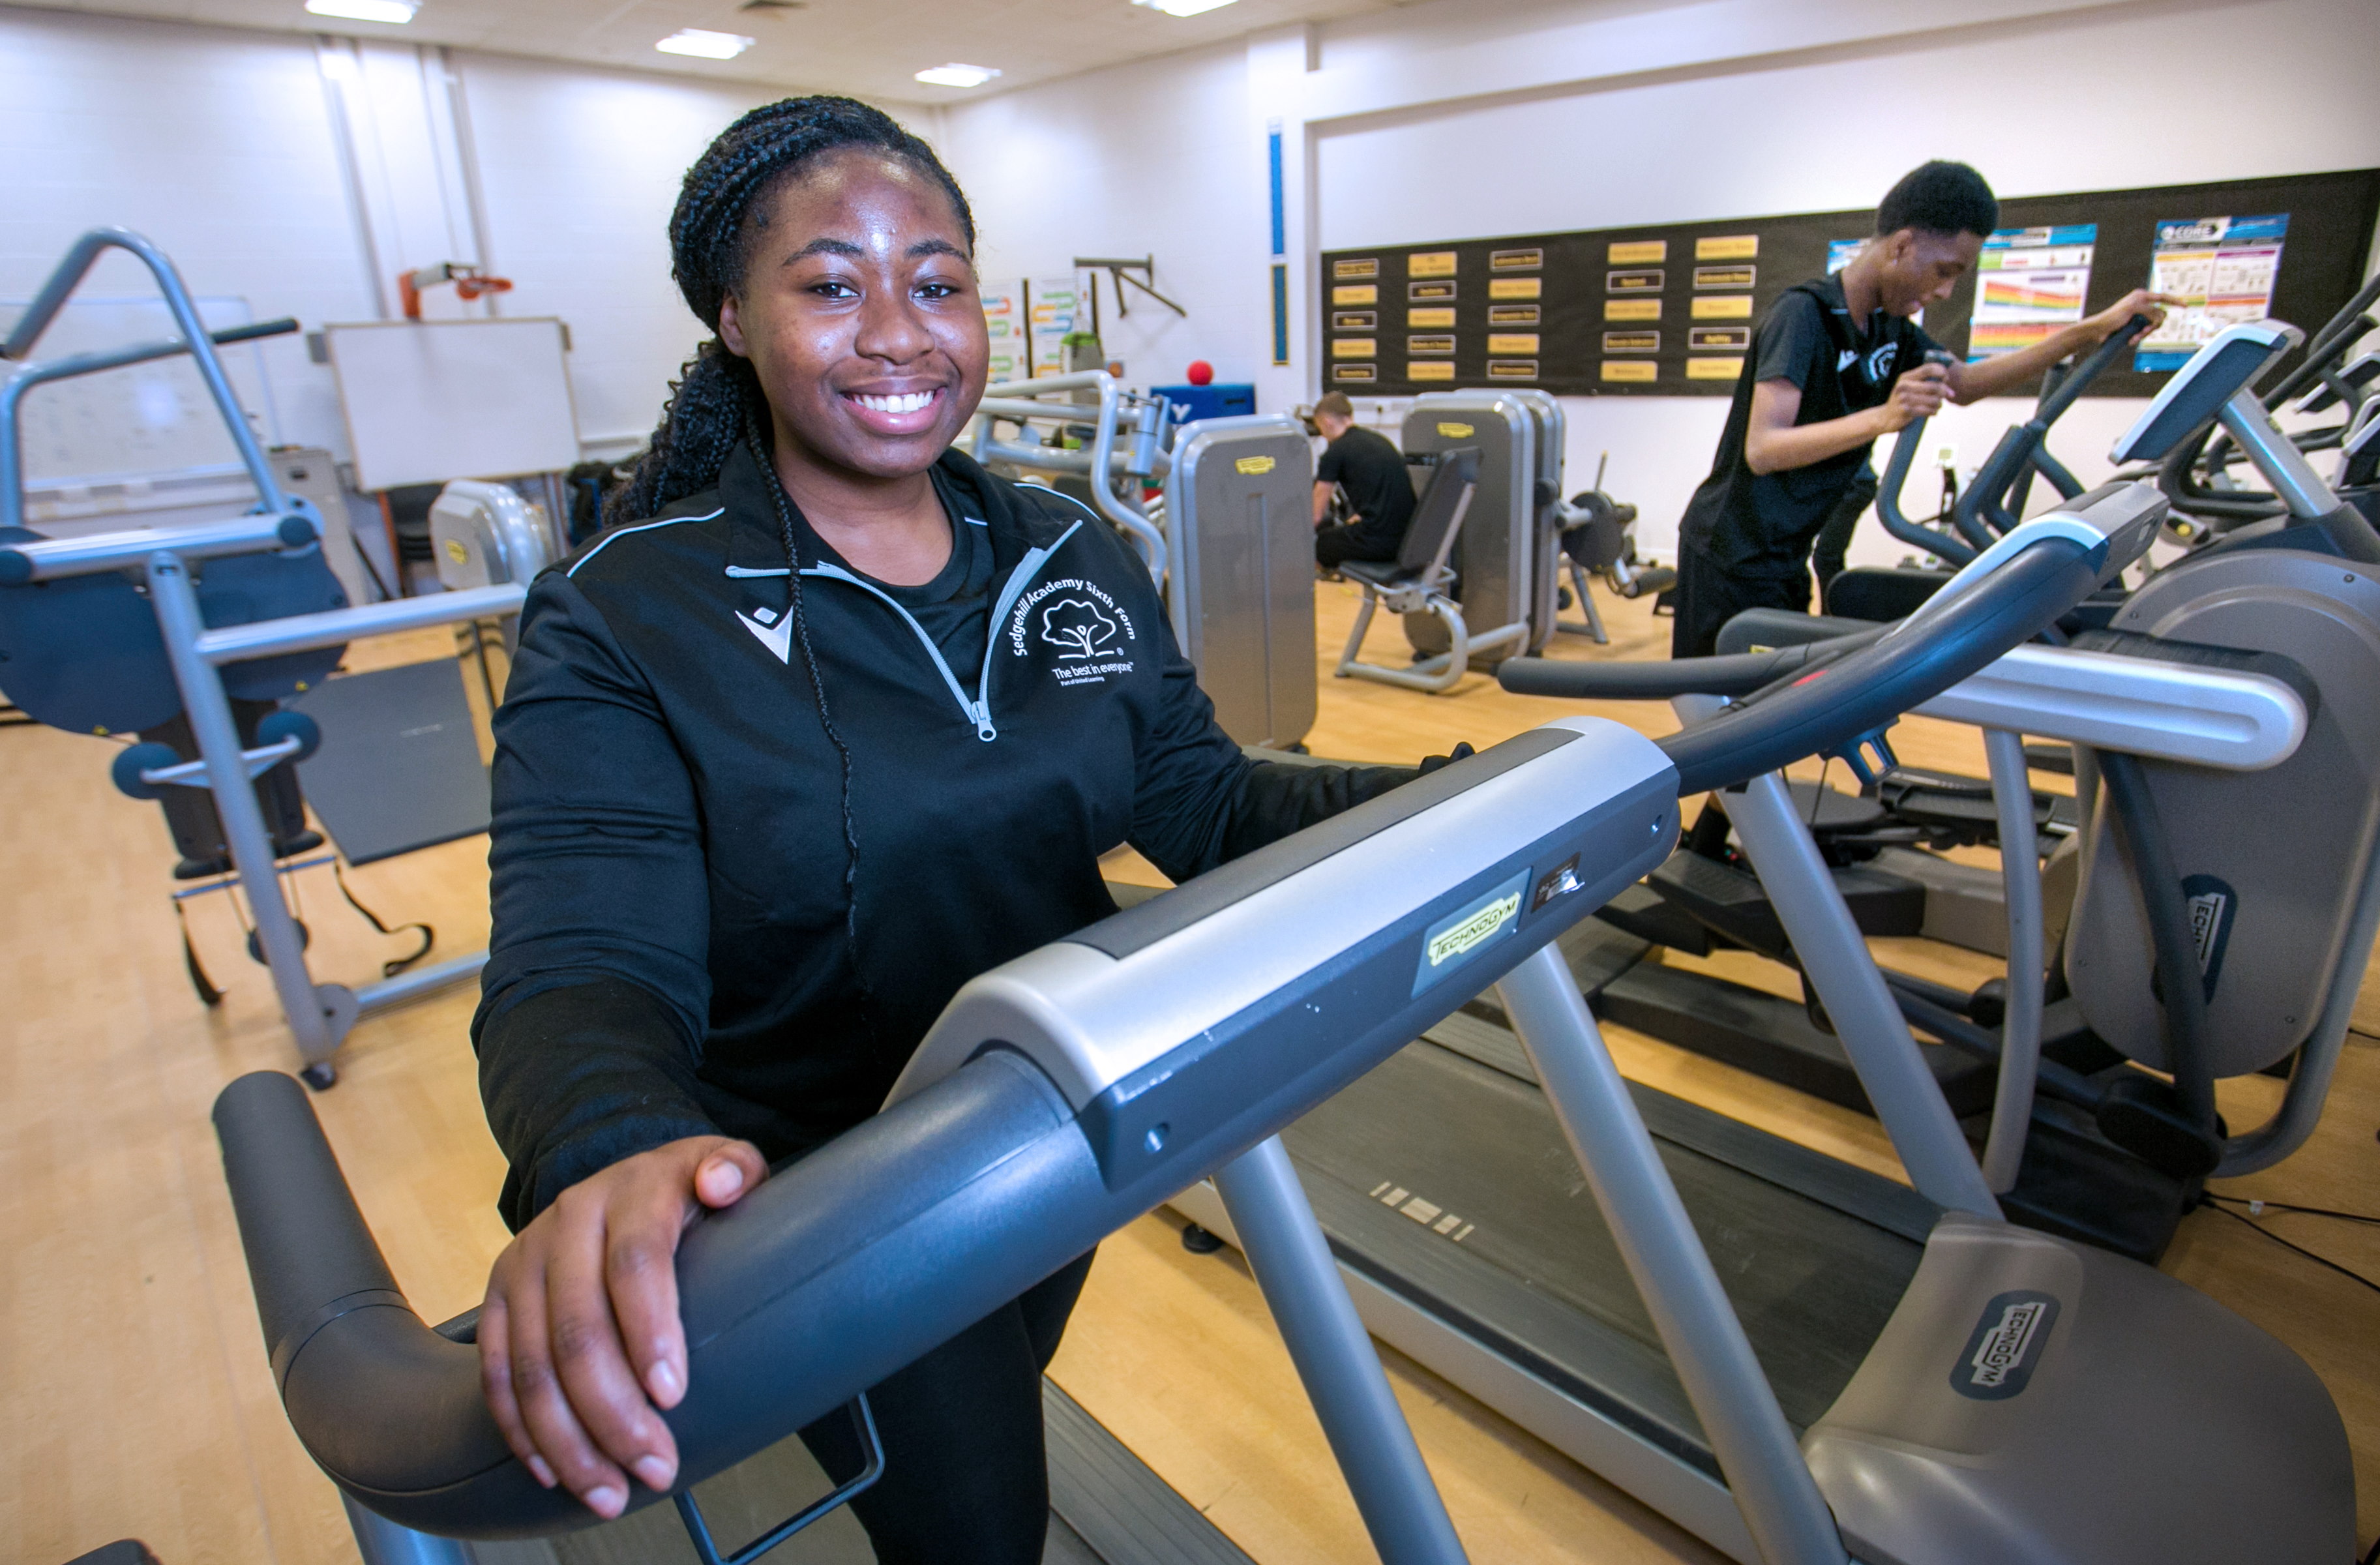 Sixth Form students have access to our fully equipped gym